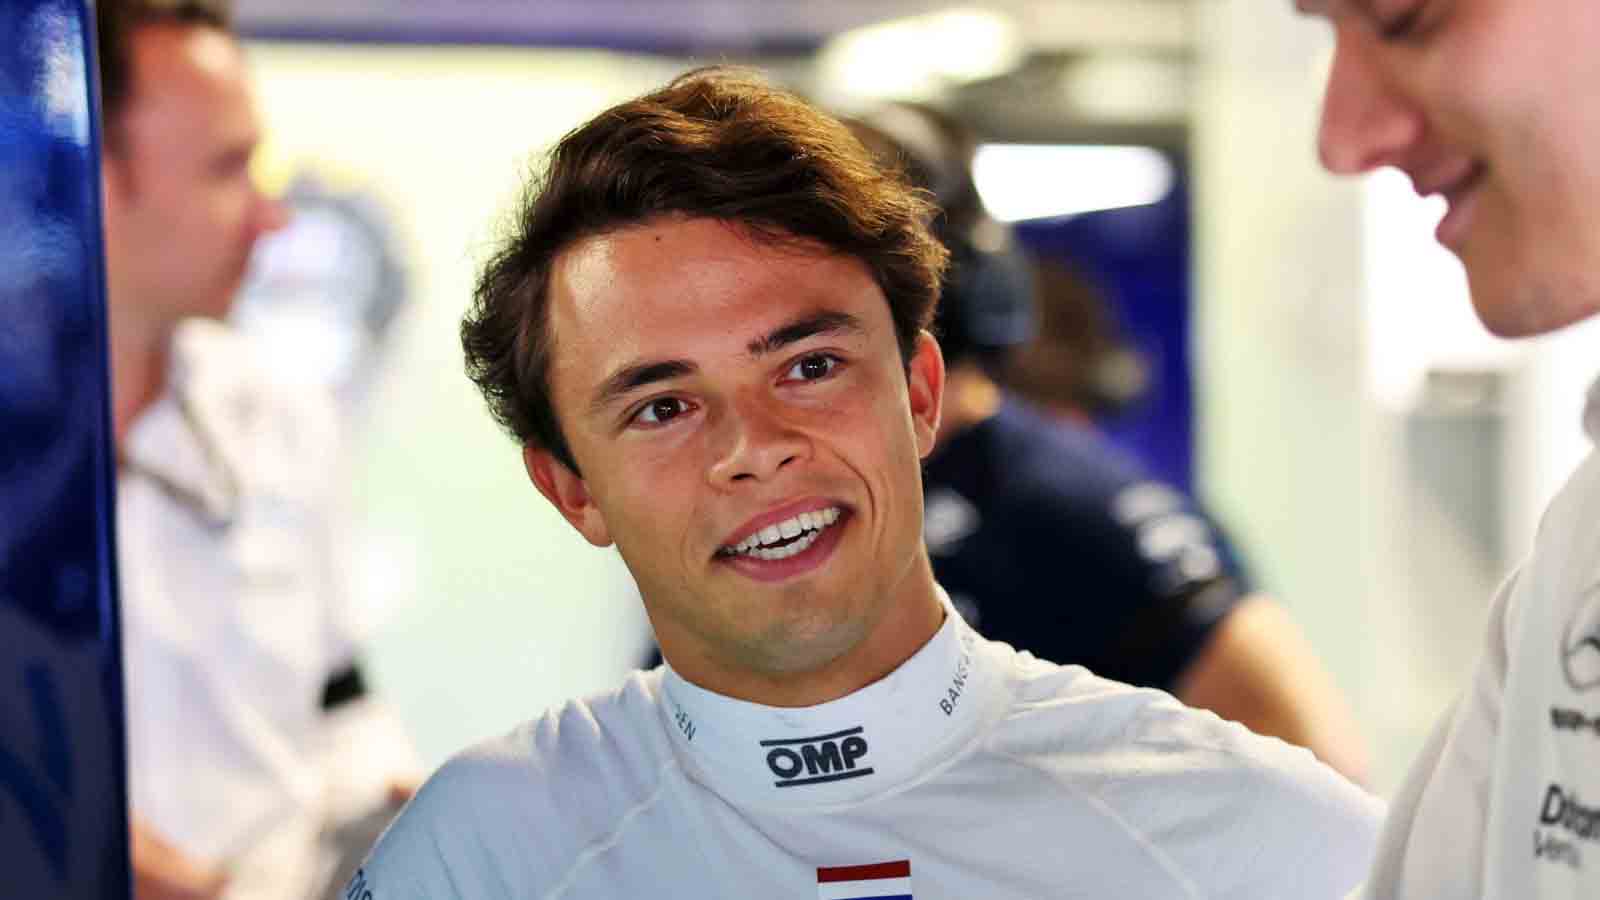 Nyck de Vries in the Williams garage. Italy September 2022.